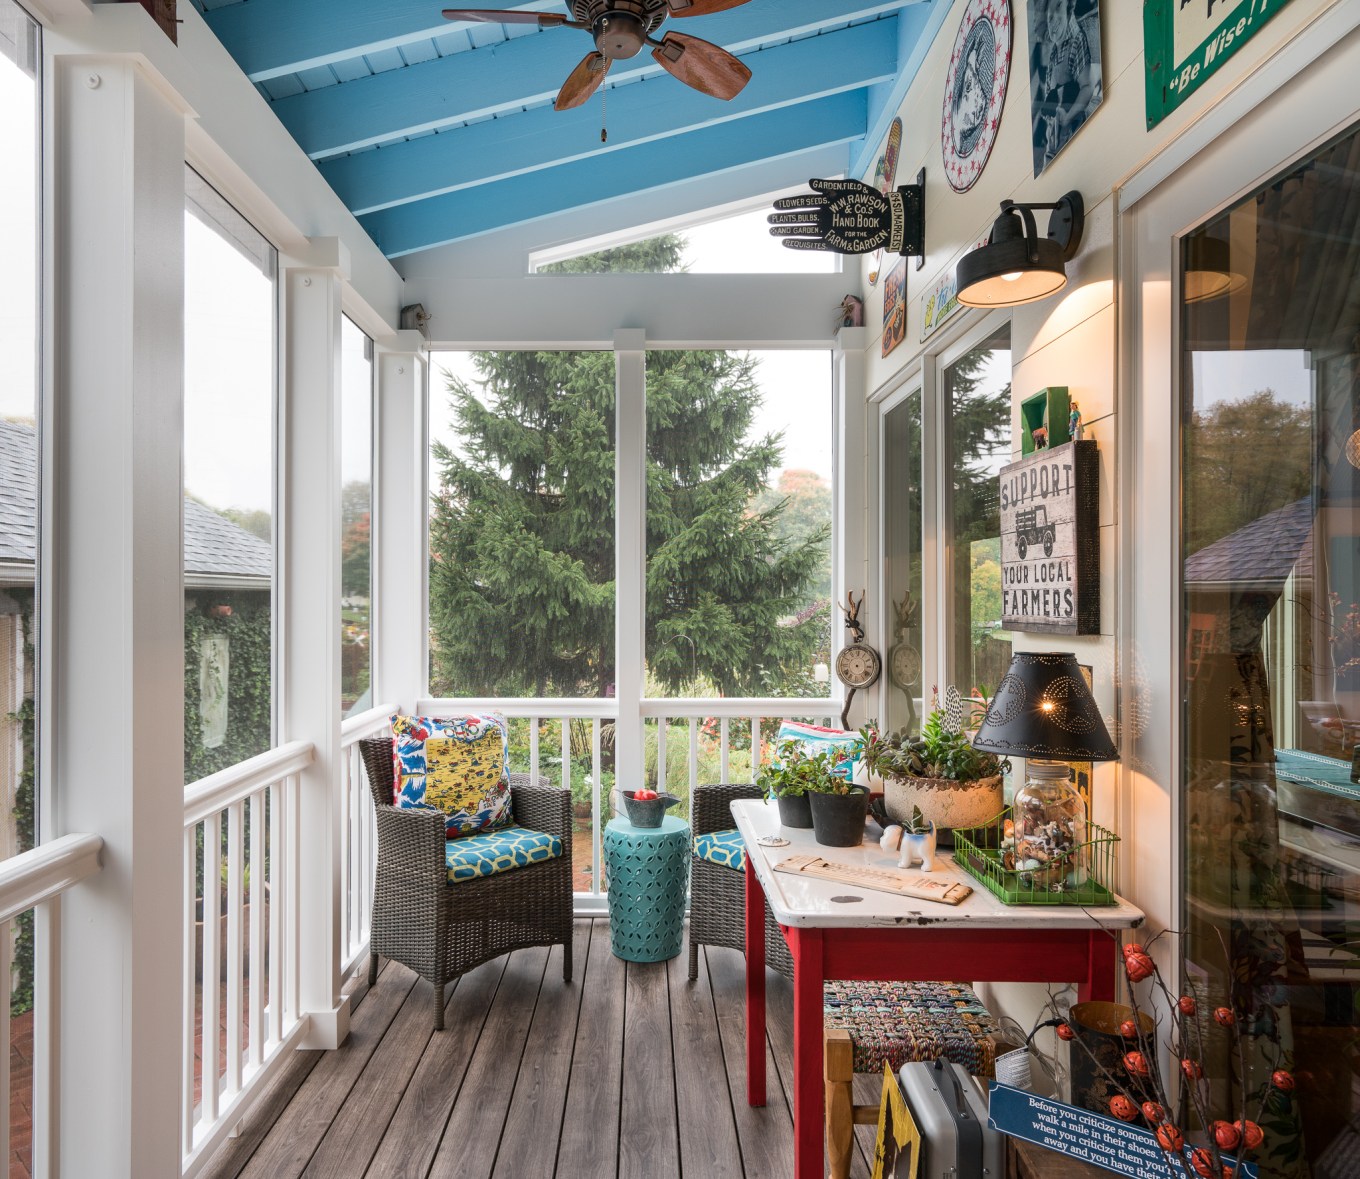 Small Front Porch Decor: 7 Budget Friendly Decorating Ideas - Organize by  Dreams